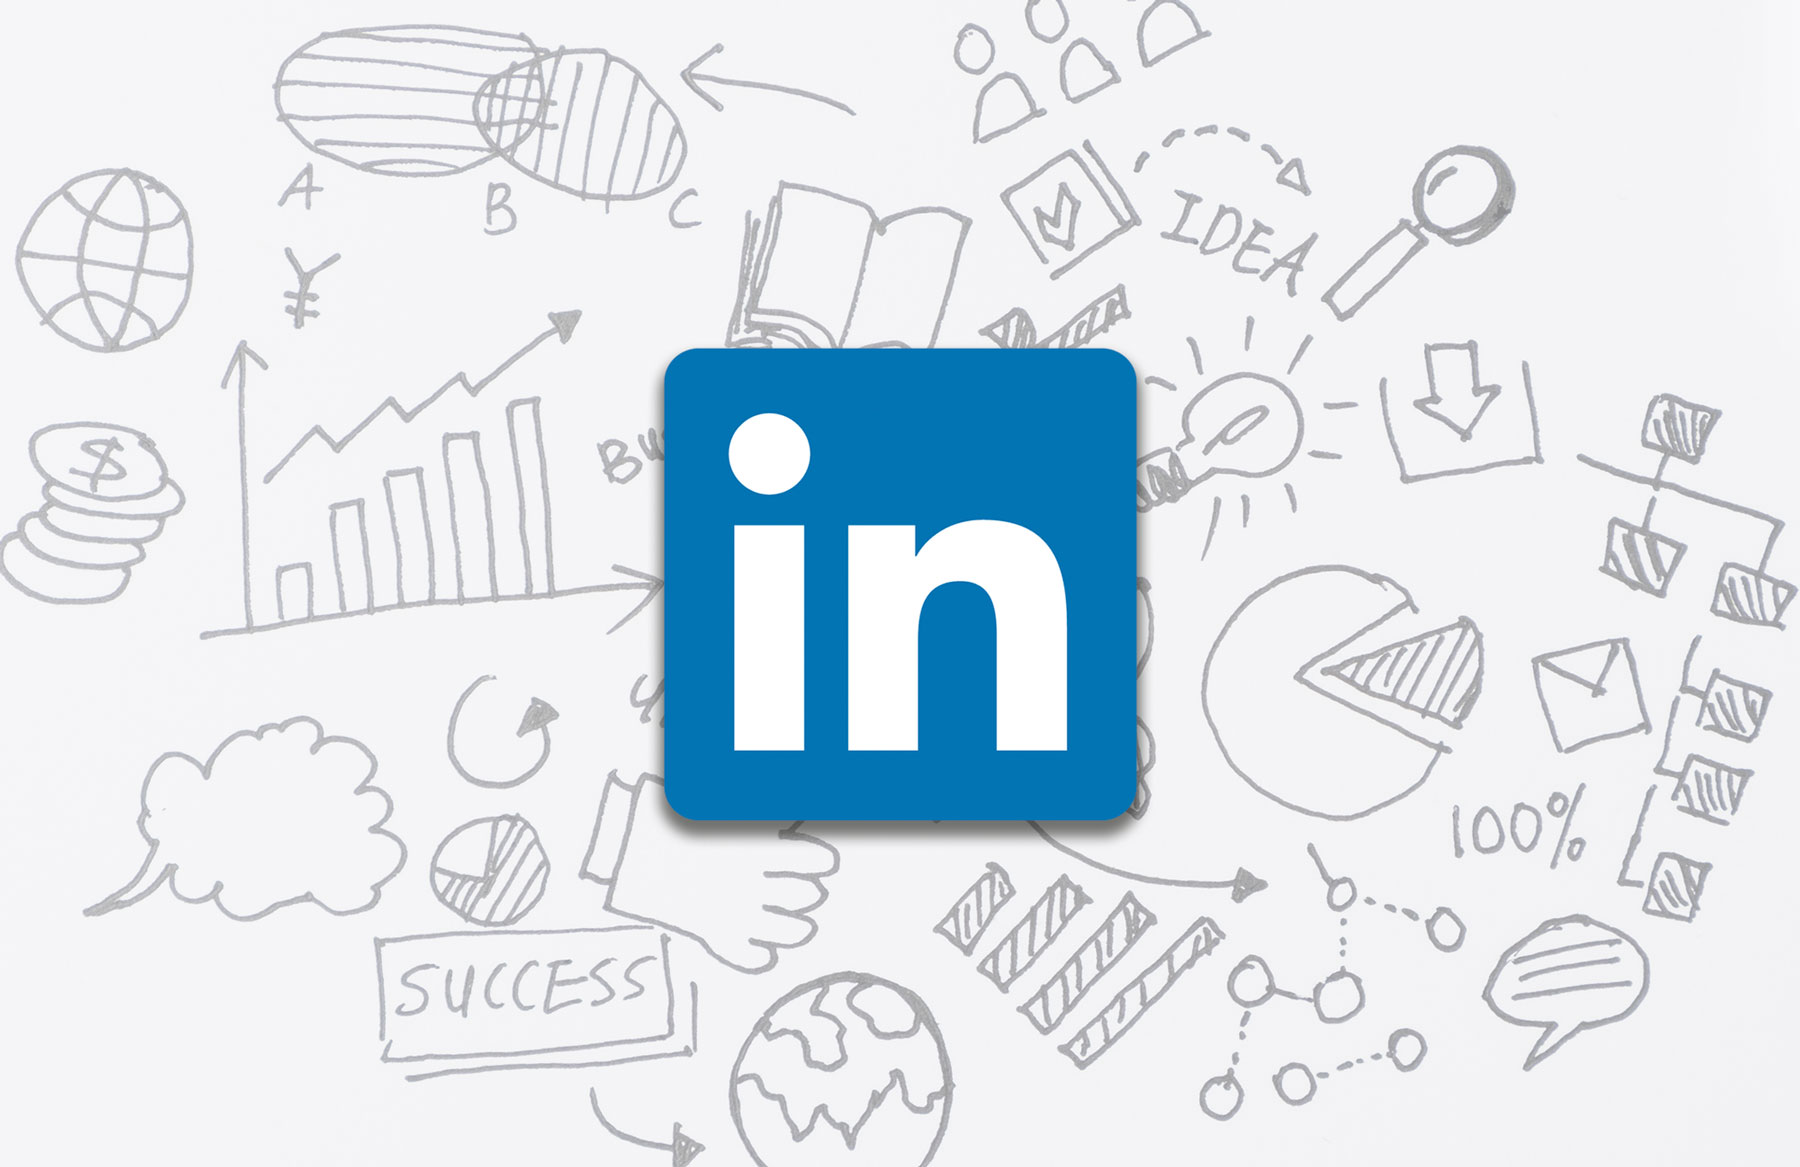 Content ideas for LinkedIn when you are running low on inspiration